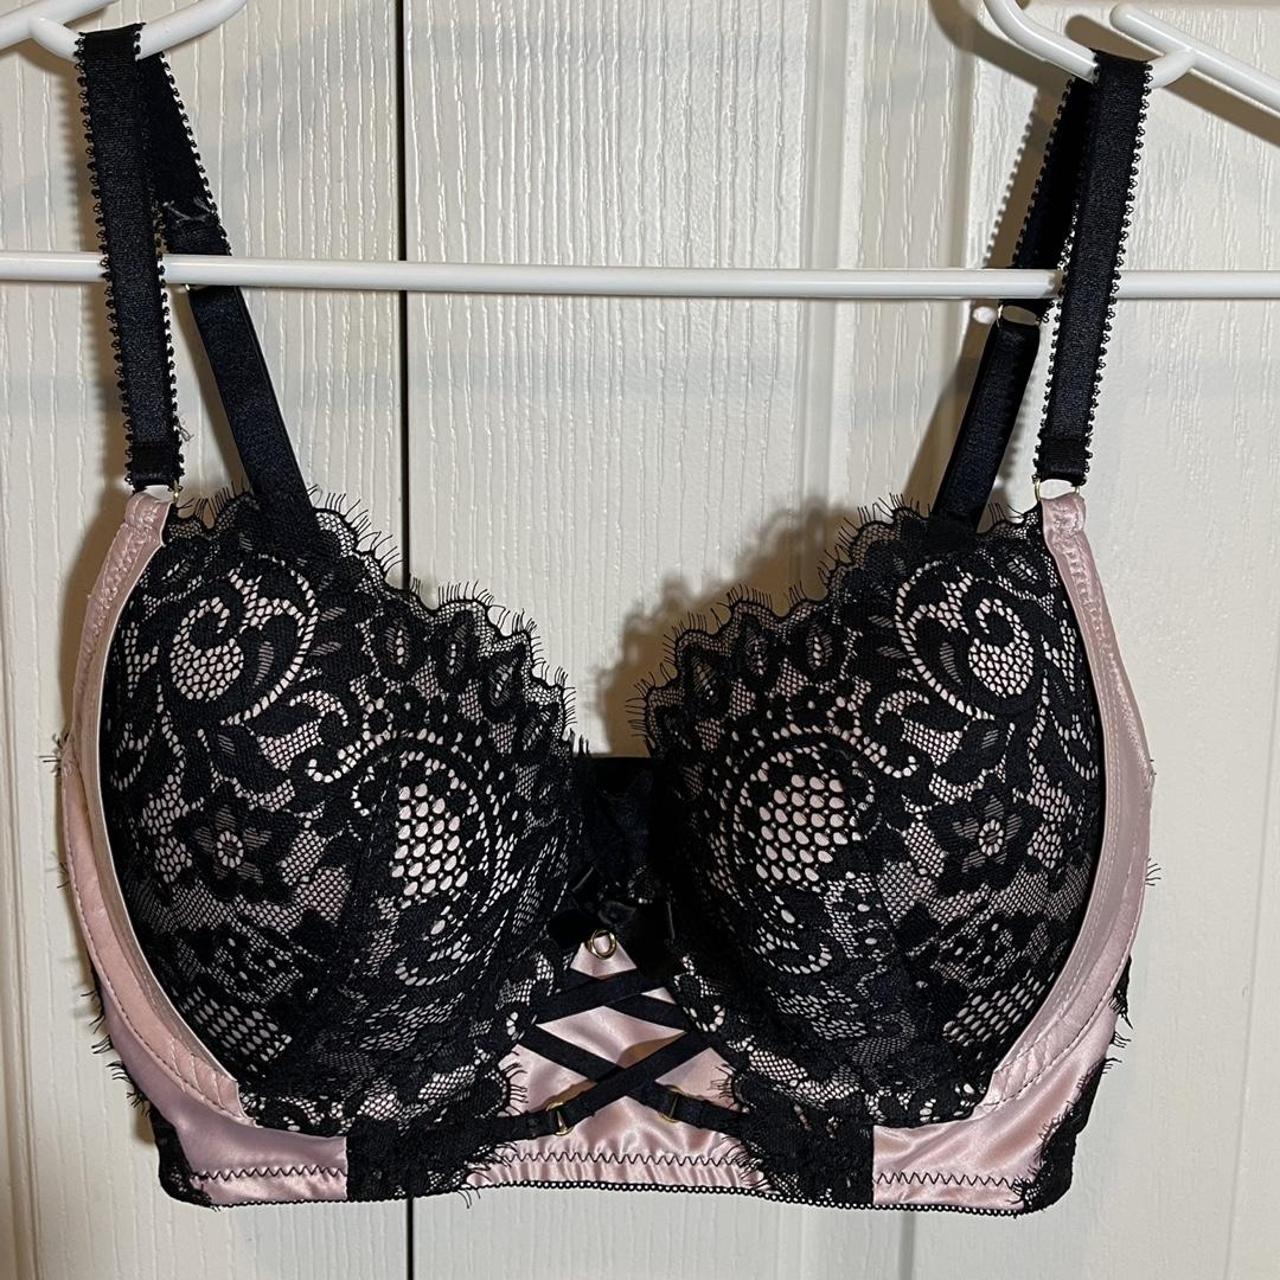 Bras n things bra size 10DD - pink and black lace... - Depop